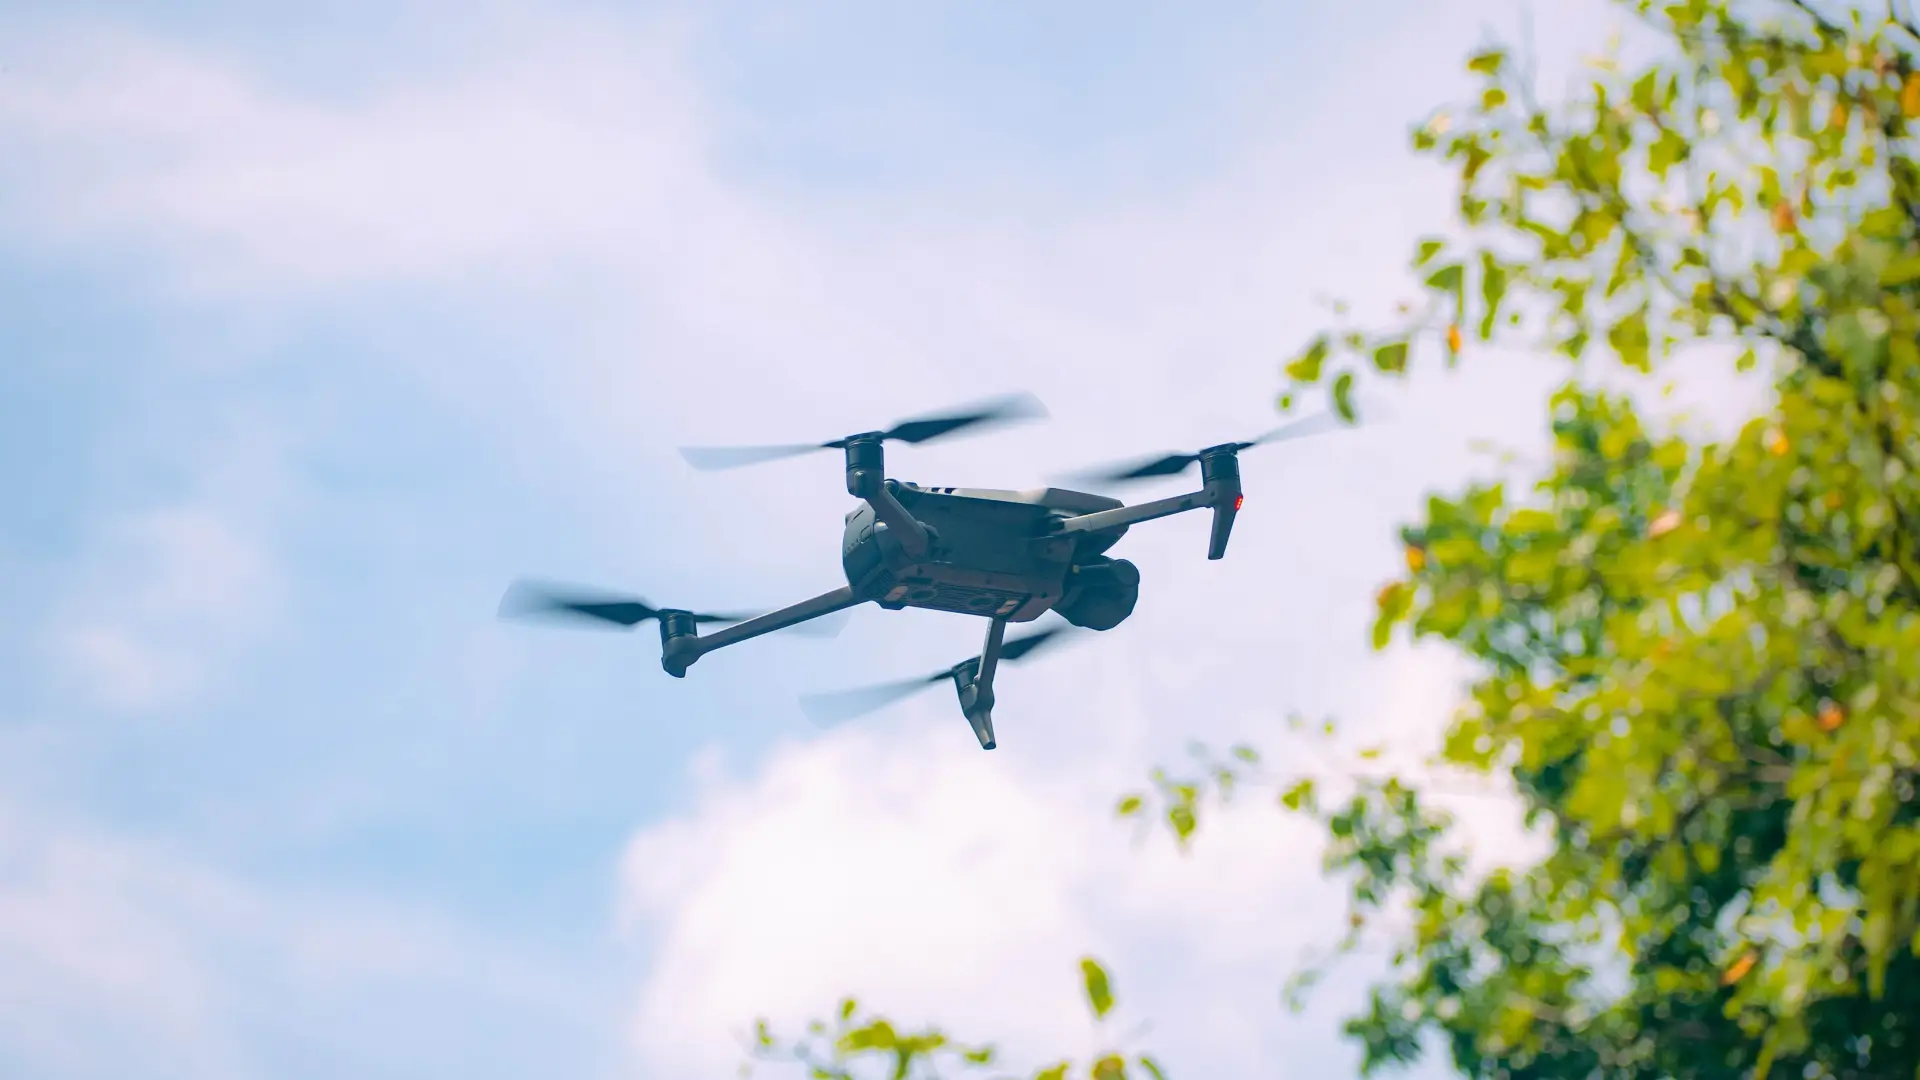 Delivery drones carrying packages for Q commerce businesses